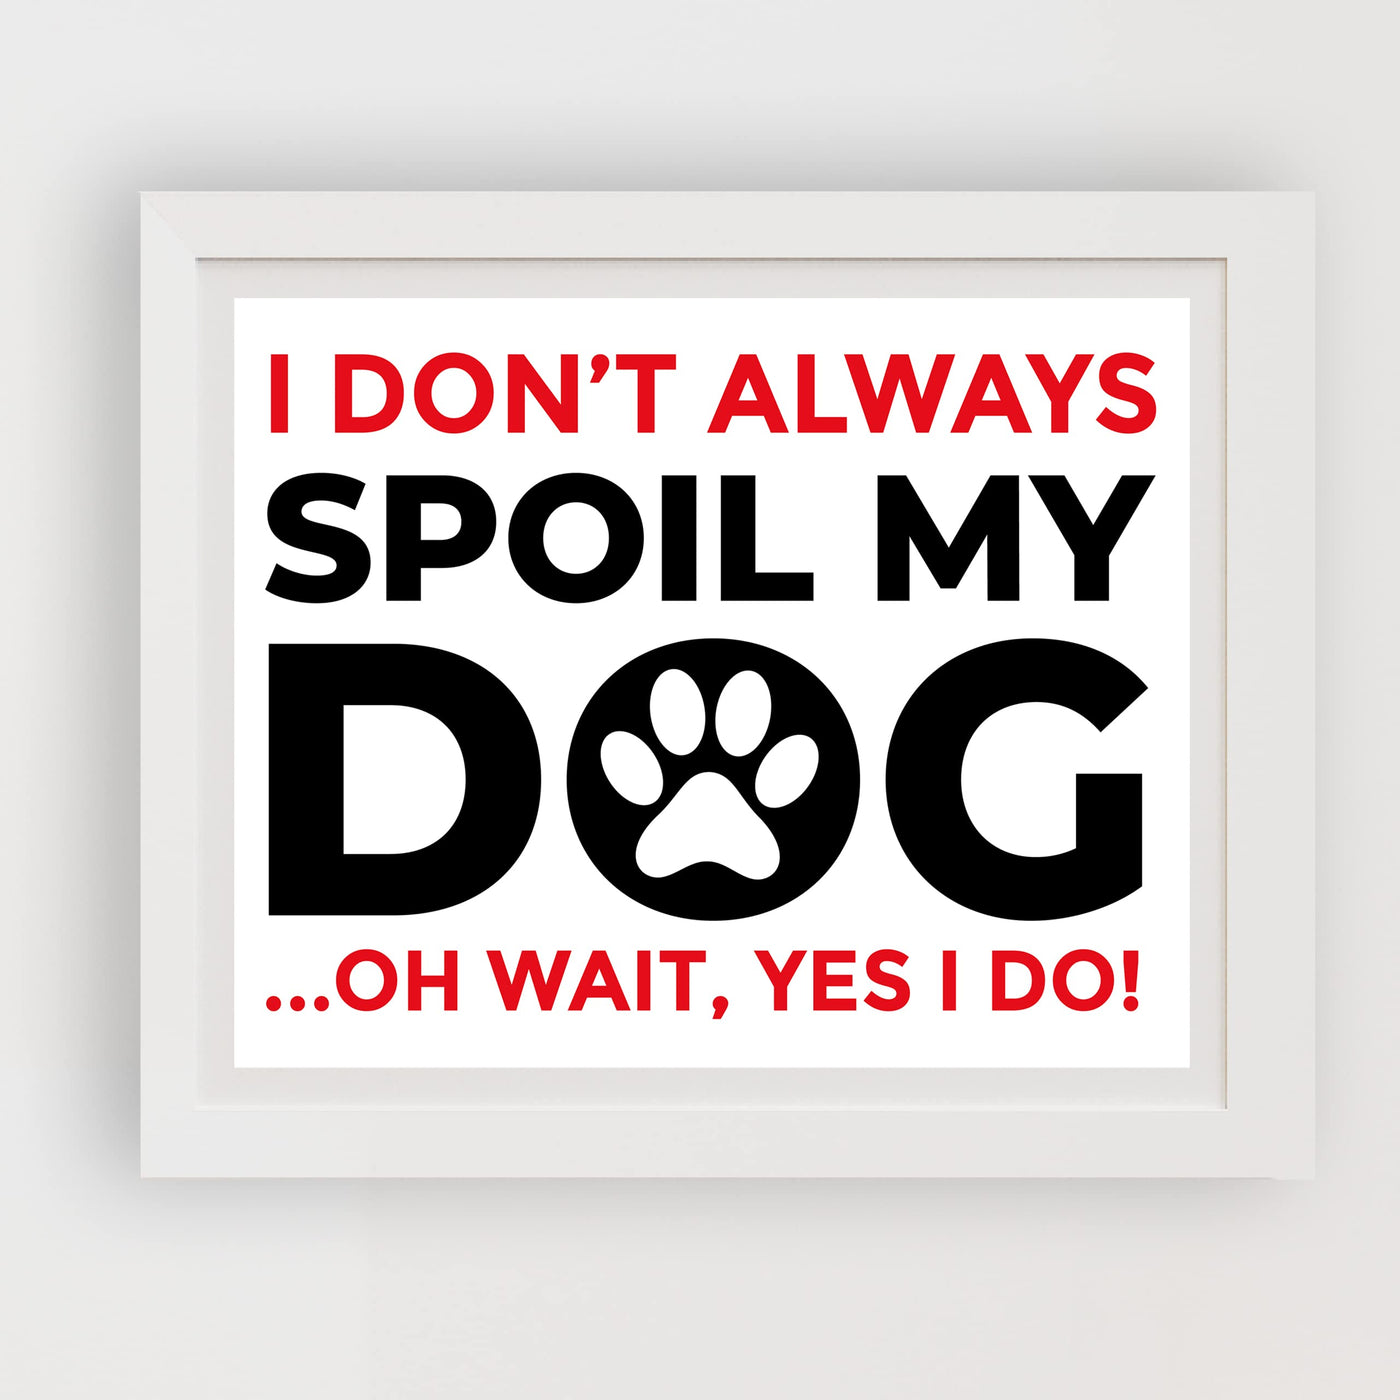 Don't Always Spoil My Pet-Funny Dog Wall Art Sign -10 x 8" Rustic Dogs Theme Wall Decor Print -Ready to Frame. Replica Sign Prints for Home-Kitchen-Welcome-Vet's Office. Fun Gift for Dog Lovers!